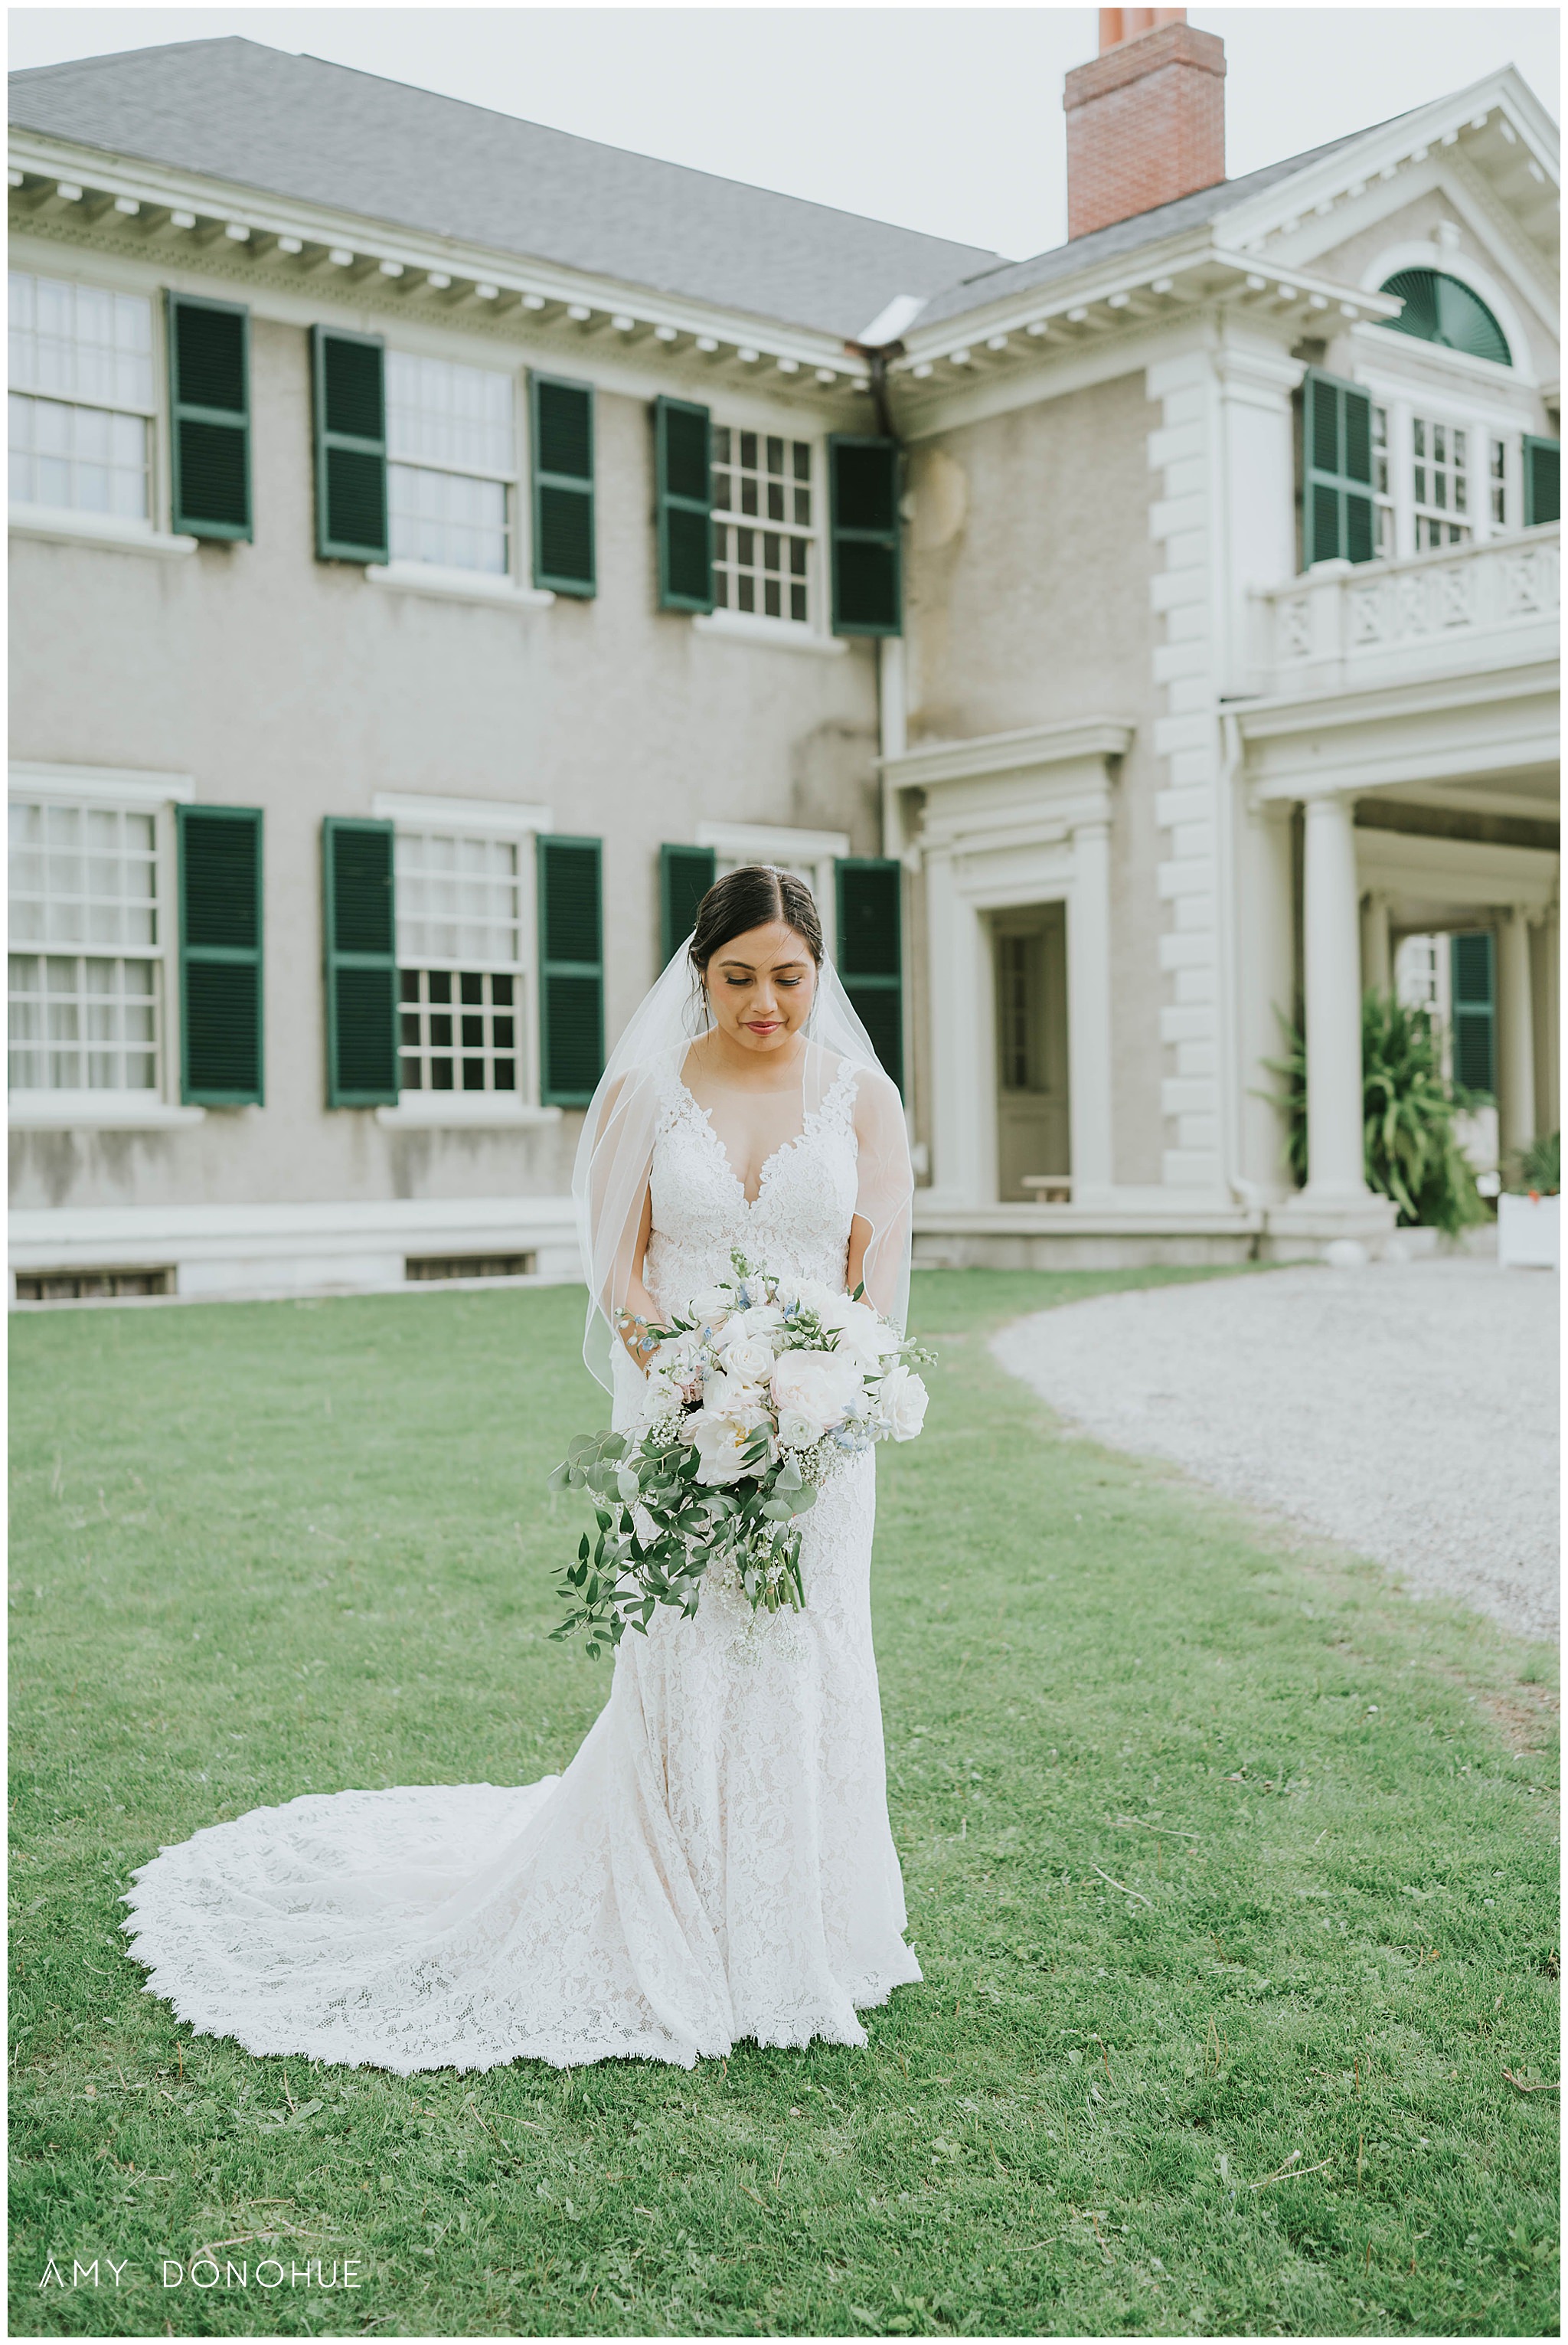 Bridal portrait in the gardens at The Hildene Lincoln Family Home in Manchester, Vermont